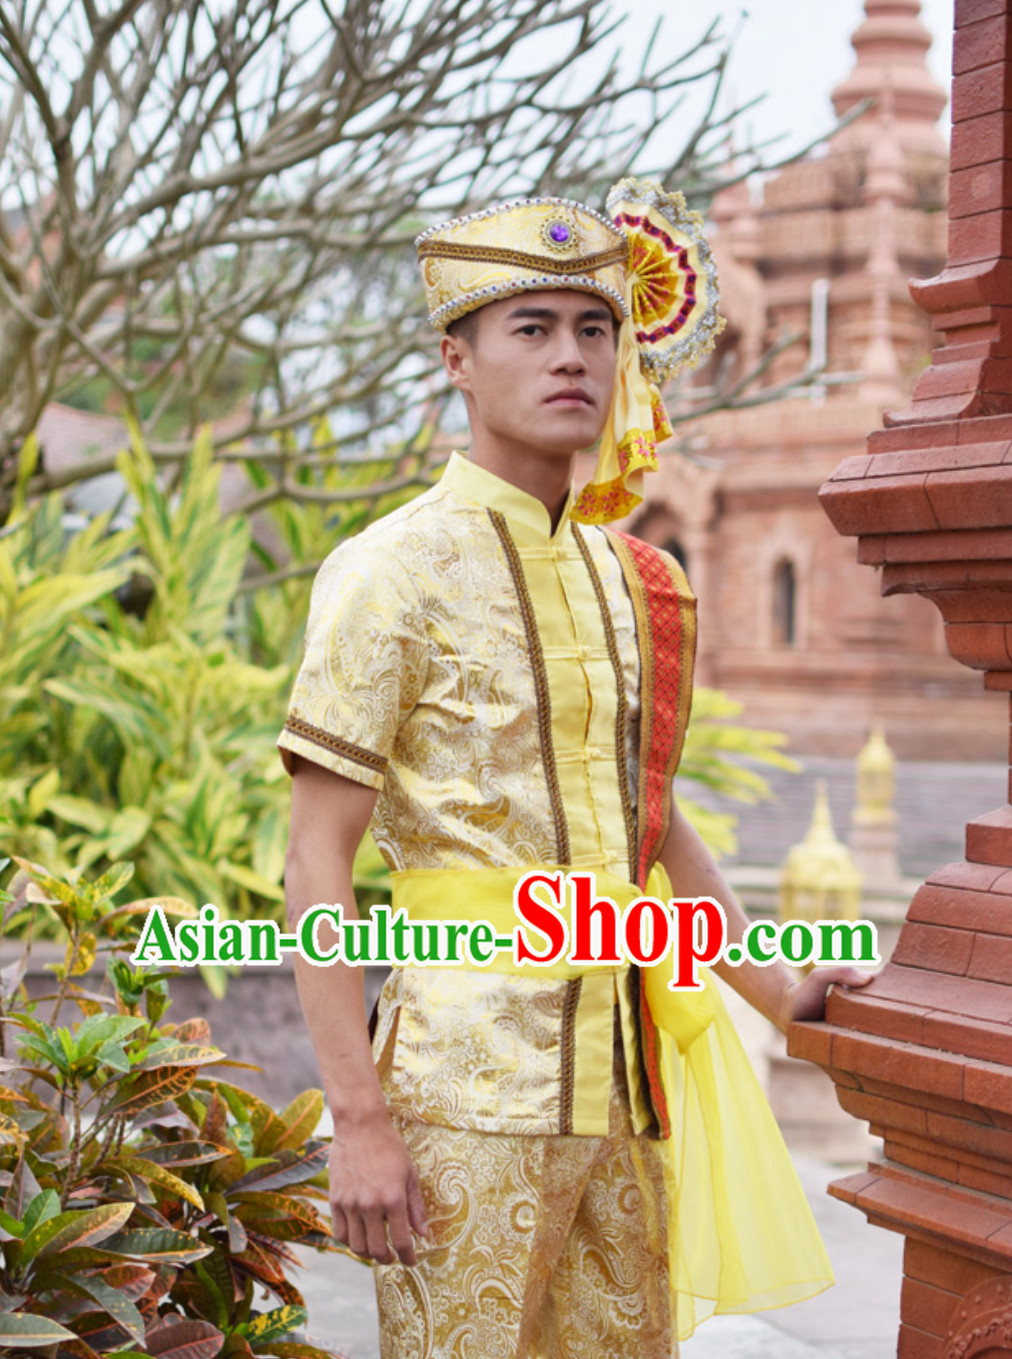 Top Traditional National Thai Dress Thai Traditional Dress Dresses Wedding Dress online for Sale Thai Clothing Thailand Clothes Complete Set for Men Boys Youth